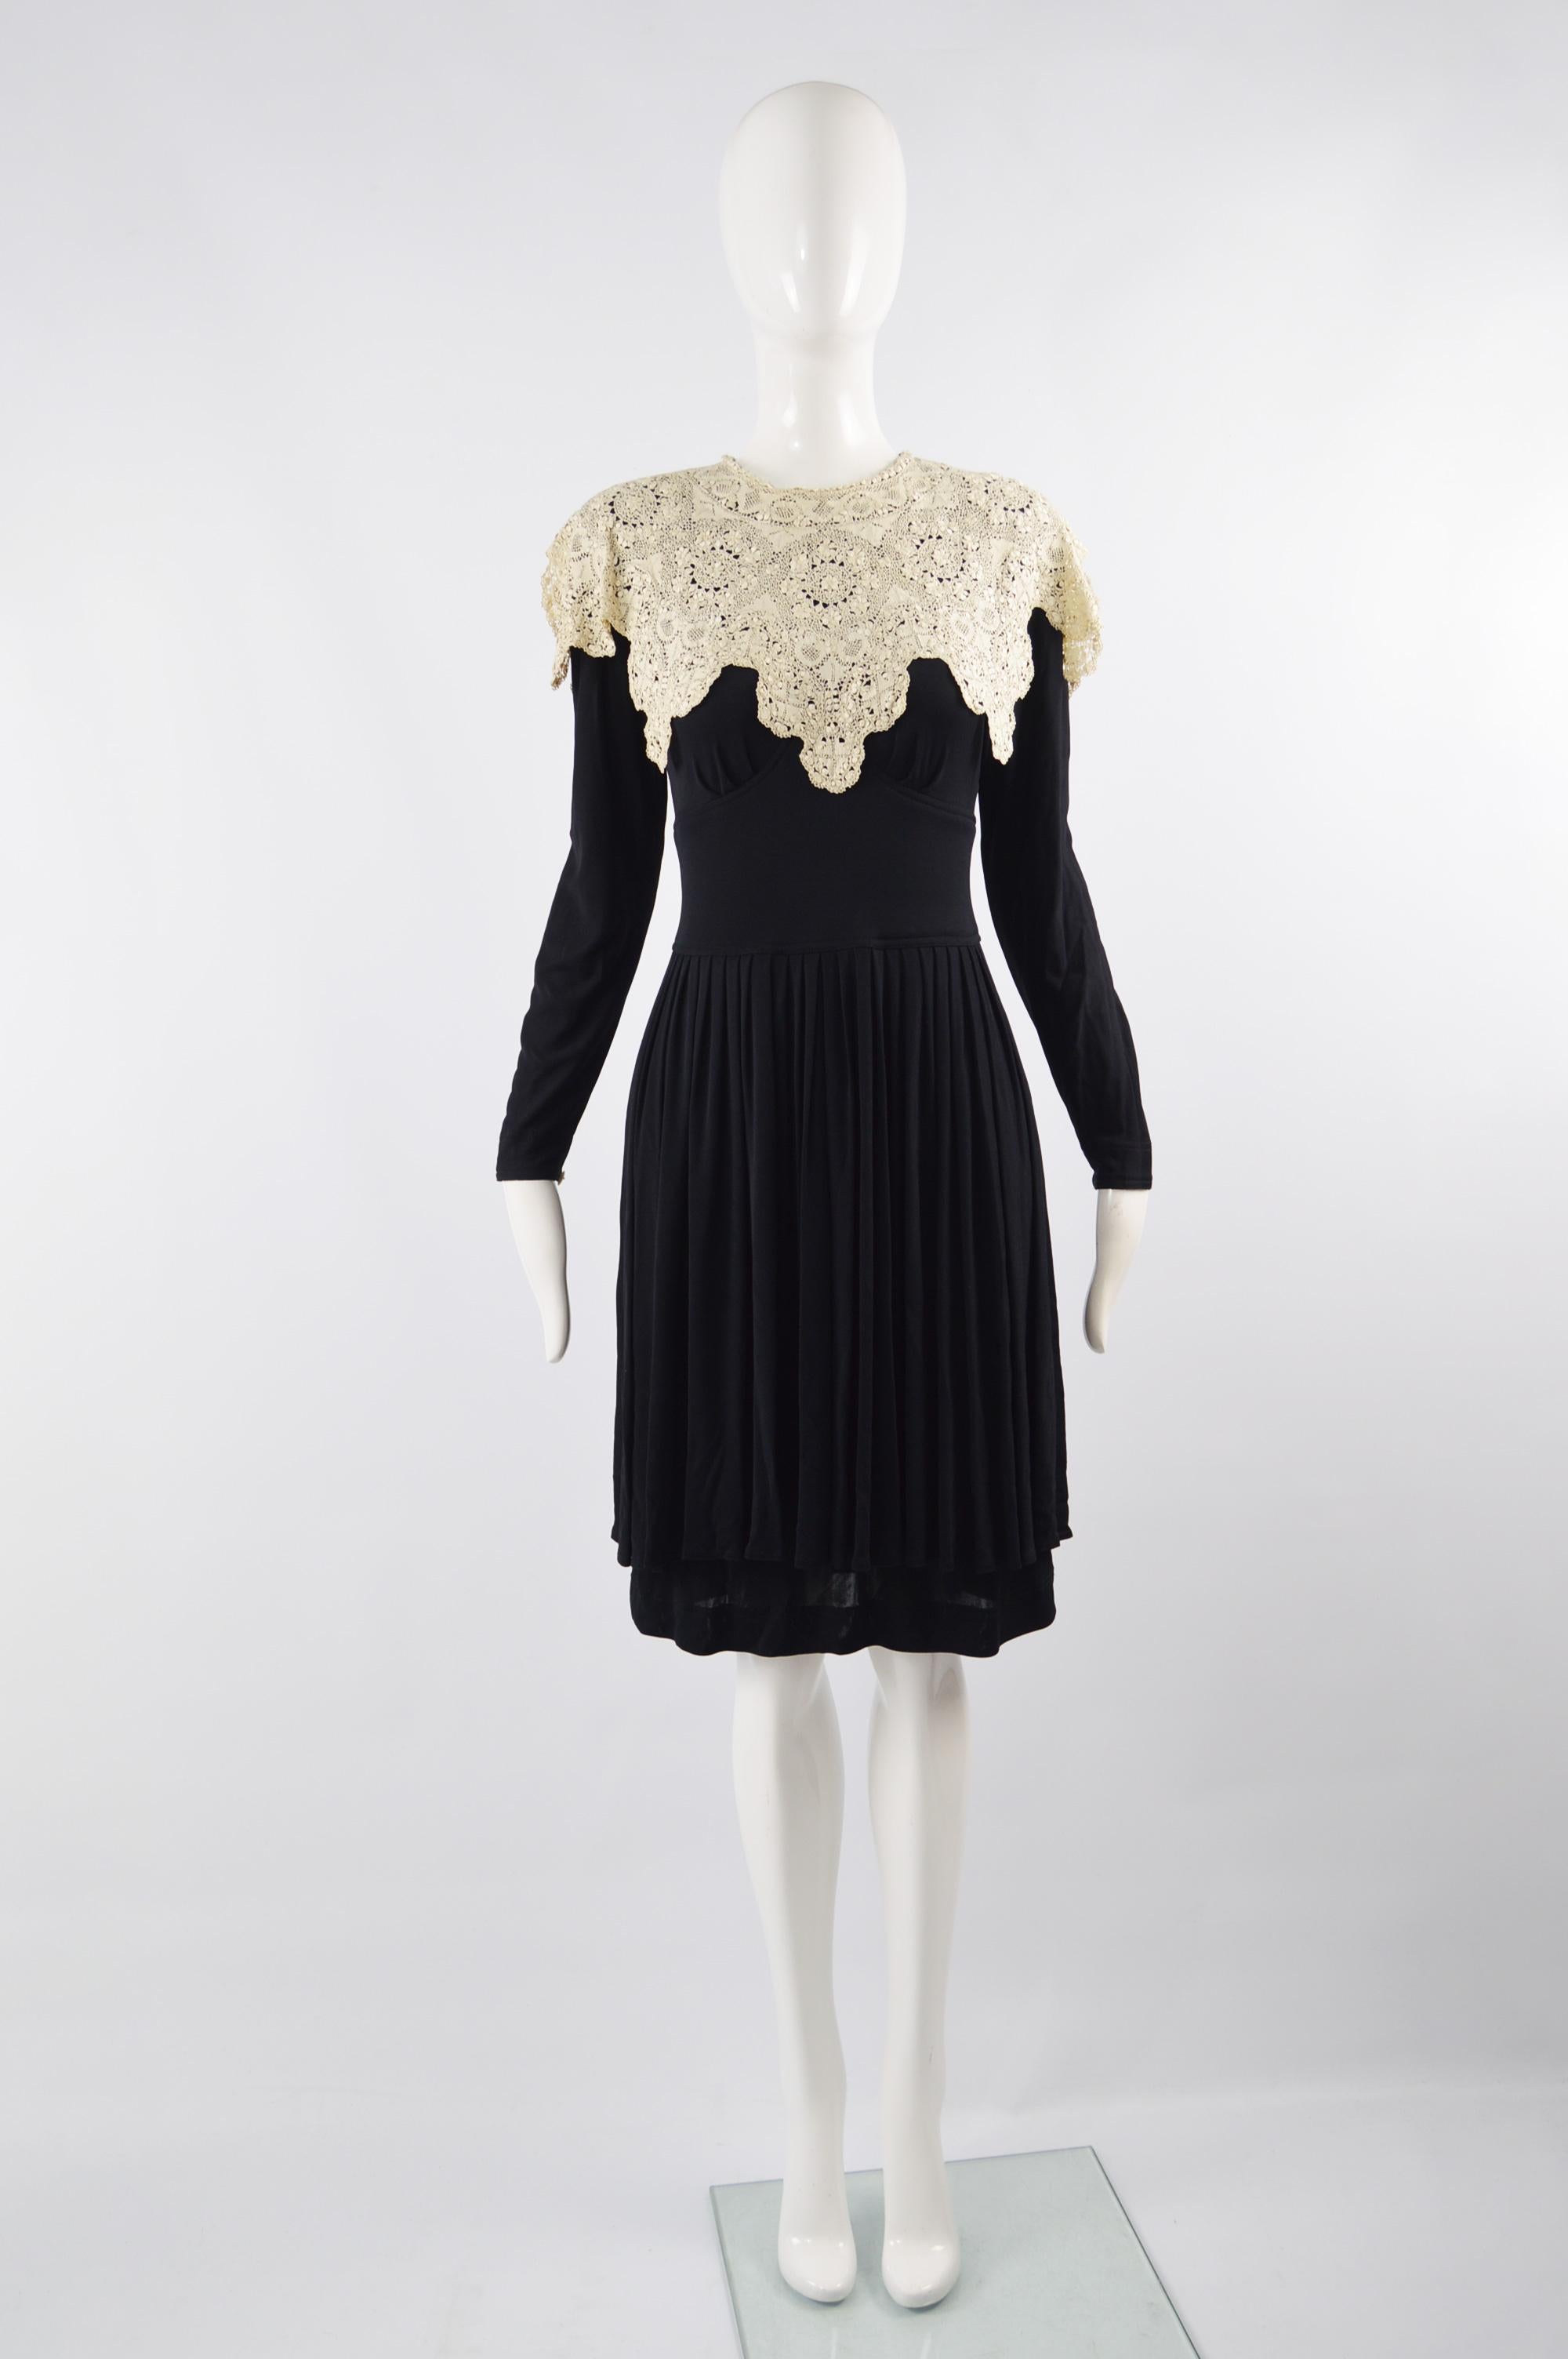 A fabulous vintage Jean Muir dress from the 70s in a black jersey with an intricate antique/ vintage lace collar and a tiered skirt. Perfect for a glamorous look in the day or worn in the evening as a statement party dress. 


Size: Marked UK 10 /